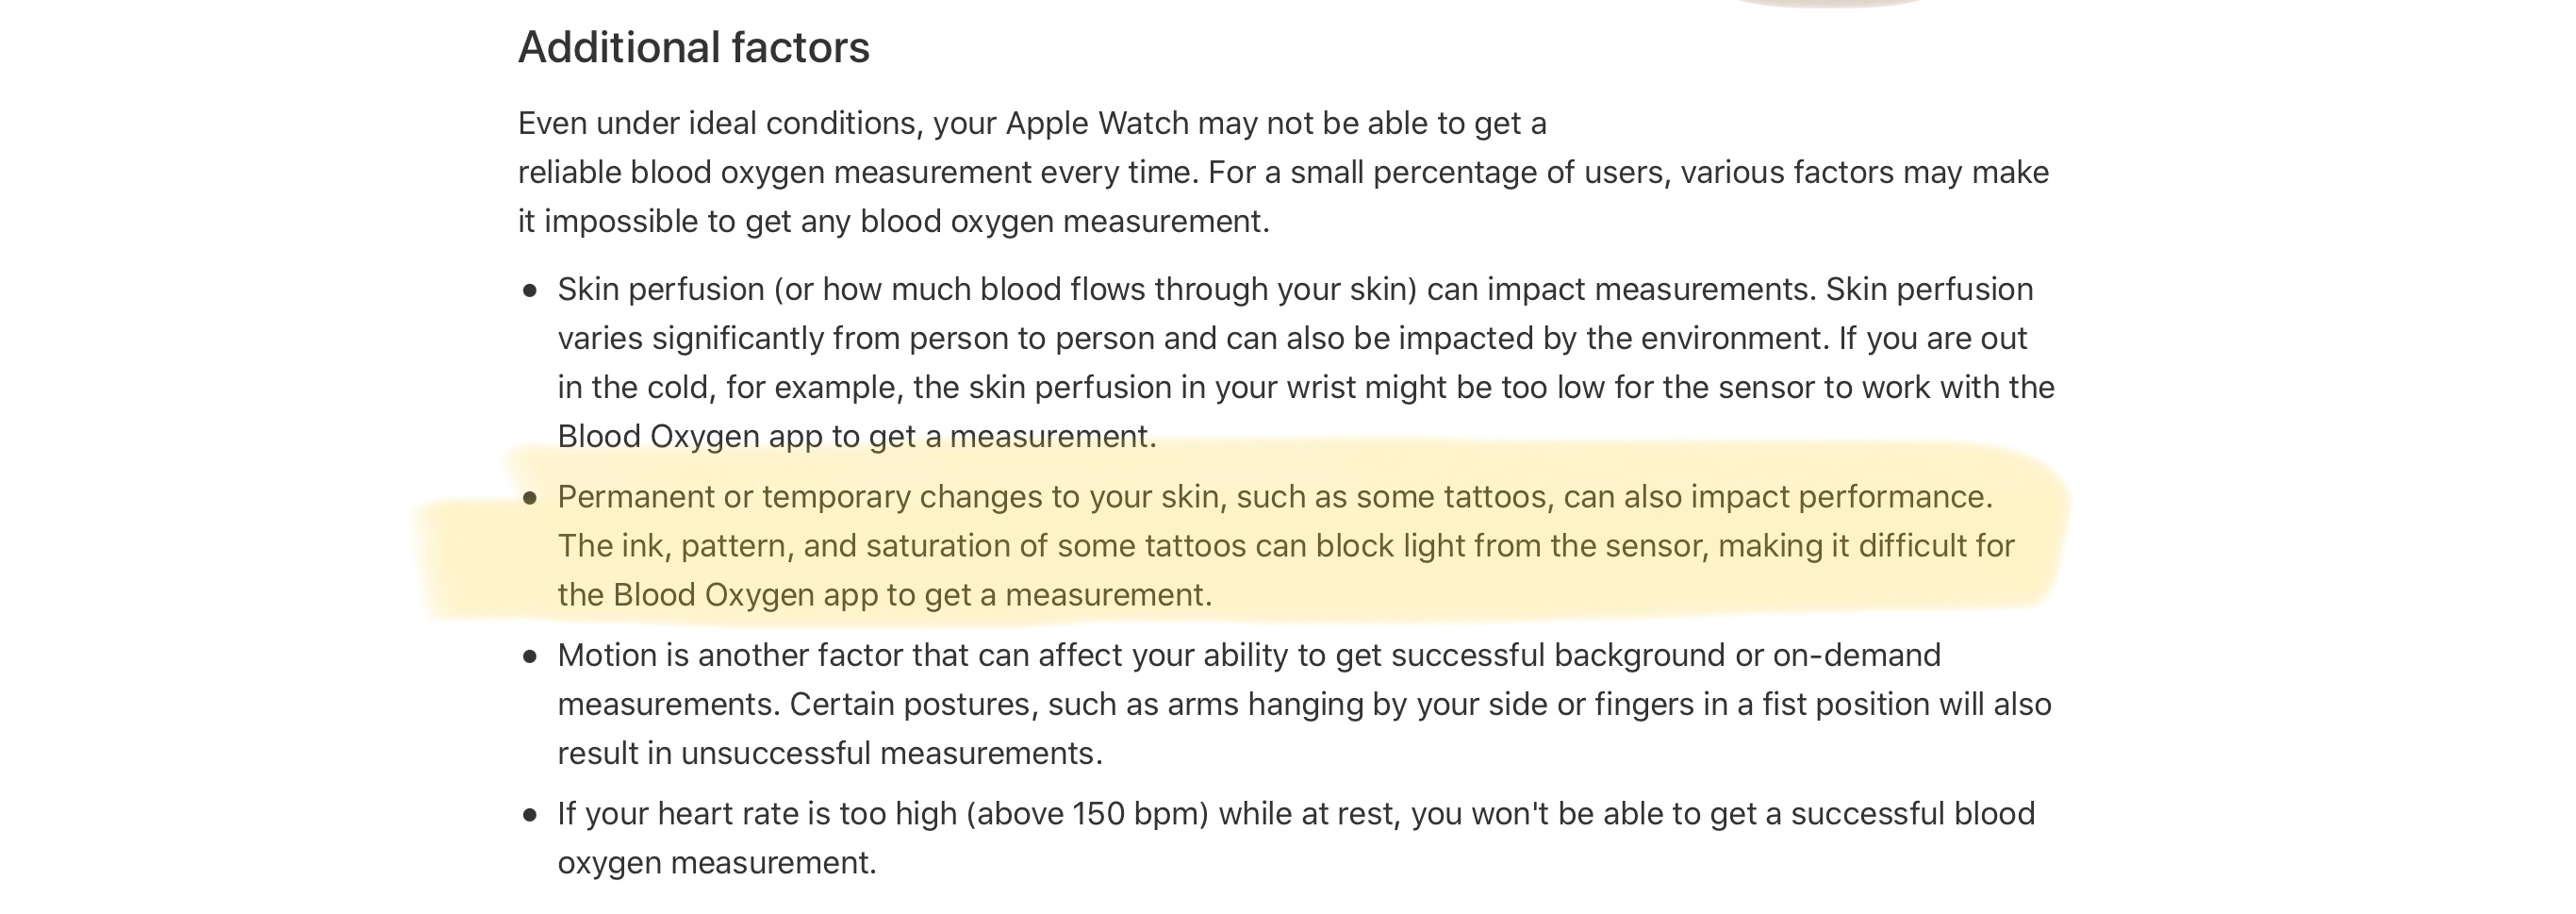 Found a fix for wrist detection with tattoos on Apple Watch : r/apple